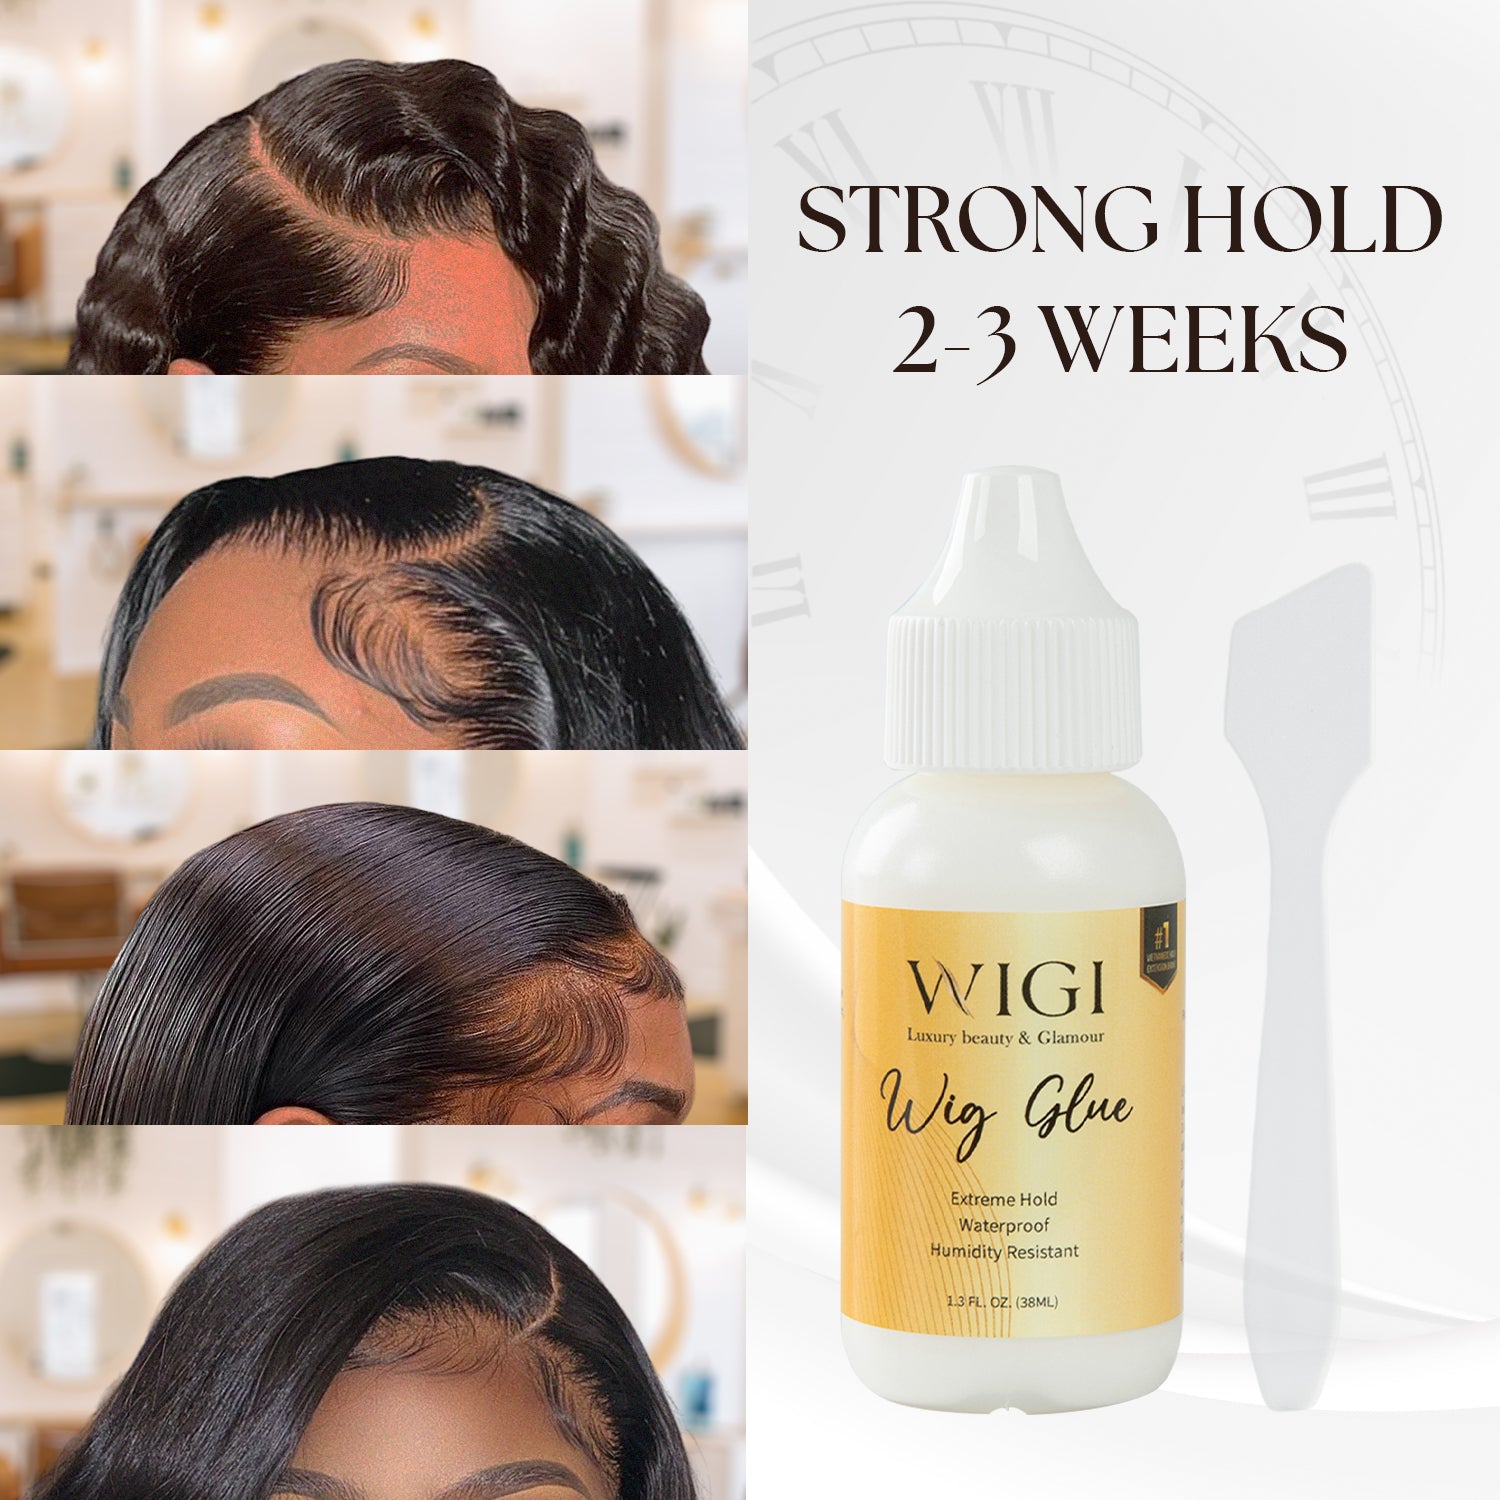 Wigi Premium Wig Glue & Remover for Lace Wig, Toupee, and Hair Replacement Systems